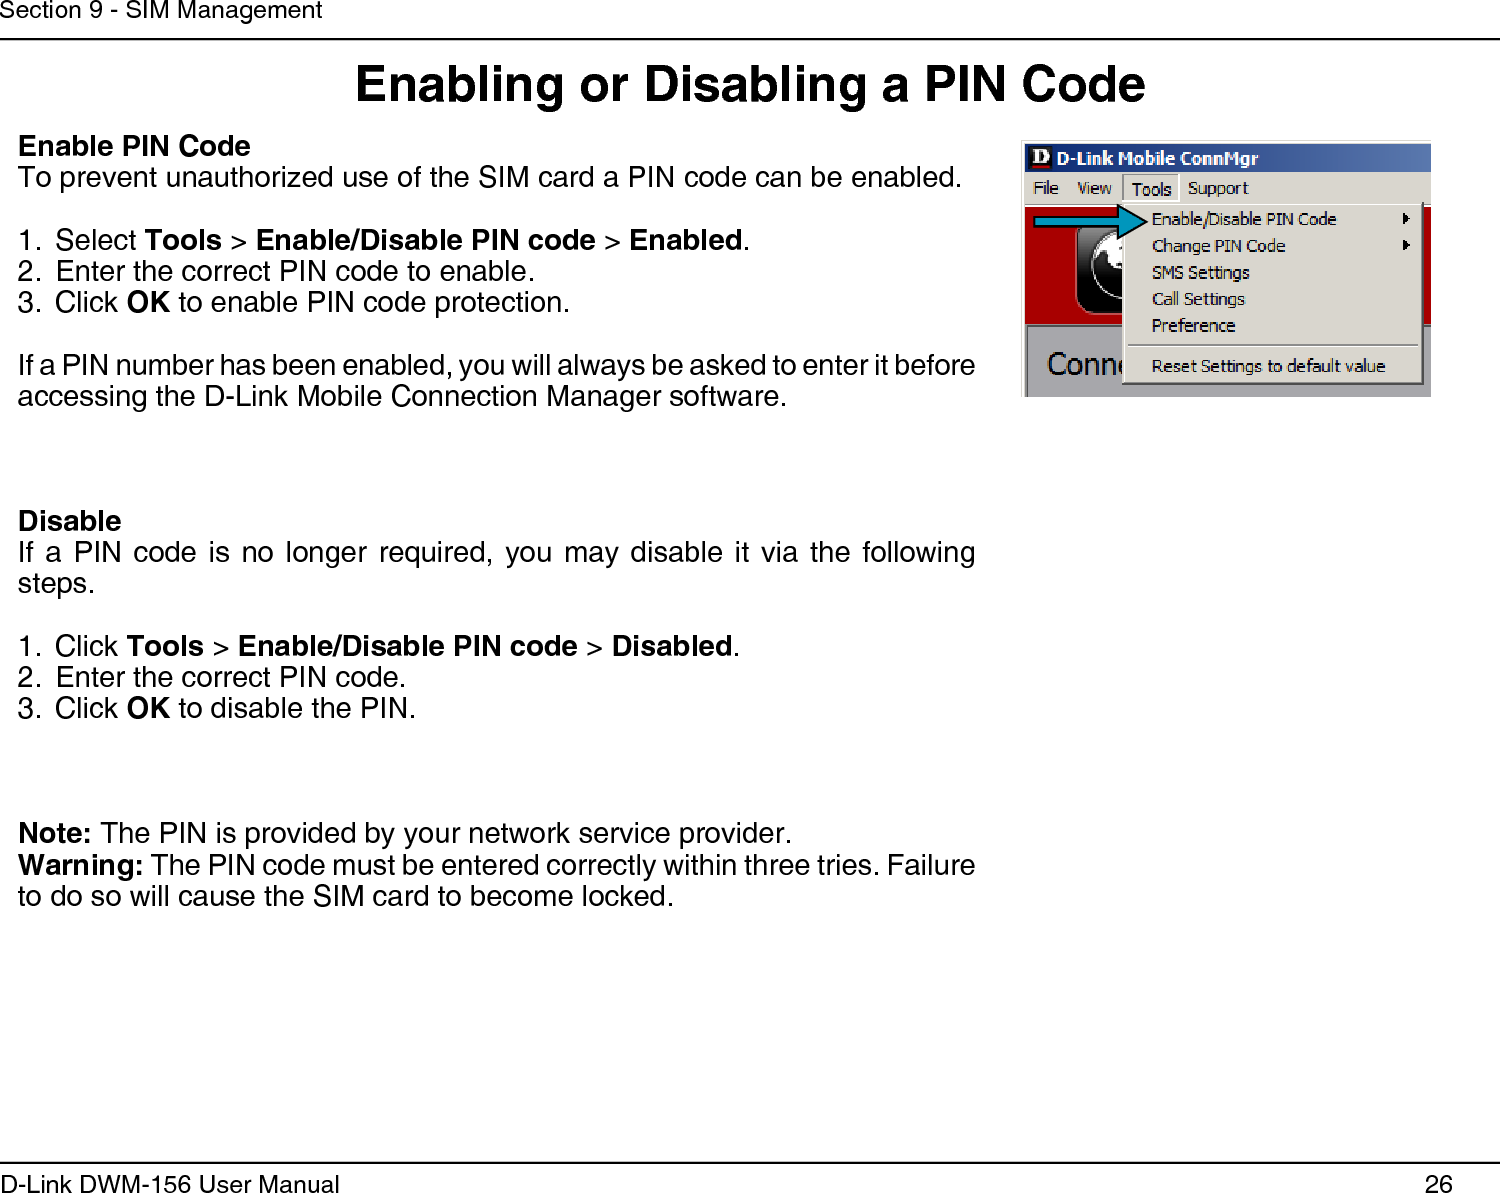 26D-Link DWM-156 User ManualSection 9 - SIM ManagementEnabling or Disabling a PIN CodeEnable PIN CodeTo prevent unauthorized use of the SIM card a PIN code can be enabled. Select 1.  Tools &gt; Enable/Disable PIN code &gt; Enabled.Enter the correct PIN code to enable.2. Click 3.  OK to enable PIN code protection.If a PIN number has been enabled, you will always be asked to enter it before accessing the D-Link Mobile Connection Manager software.DisableIf  a  PIN  code  is  no  longer  required,  you  may  disable  it  via  the  following steps. Click 1.  Tools &gt; Enable/Disable PIN code &gt; Disabled.Enter the correct PIN code.2. Click 3.  OK to disable the PIN.Note: The PIN is provided by your network service provider.Warning: The PIN code must be entered correctly within three tries. Failure to do so will cause the SIM card to become locked.